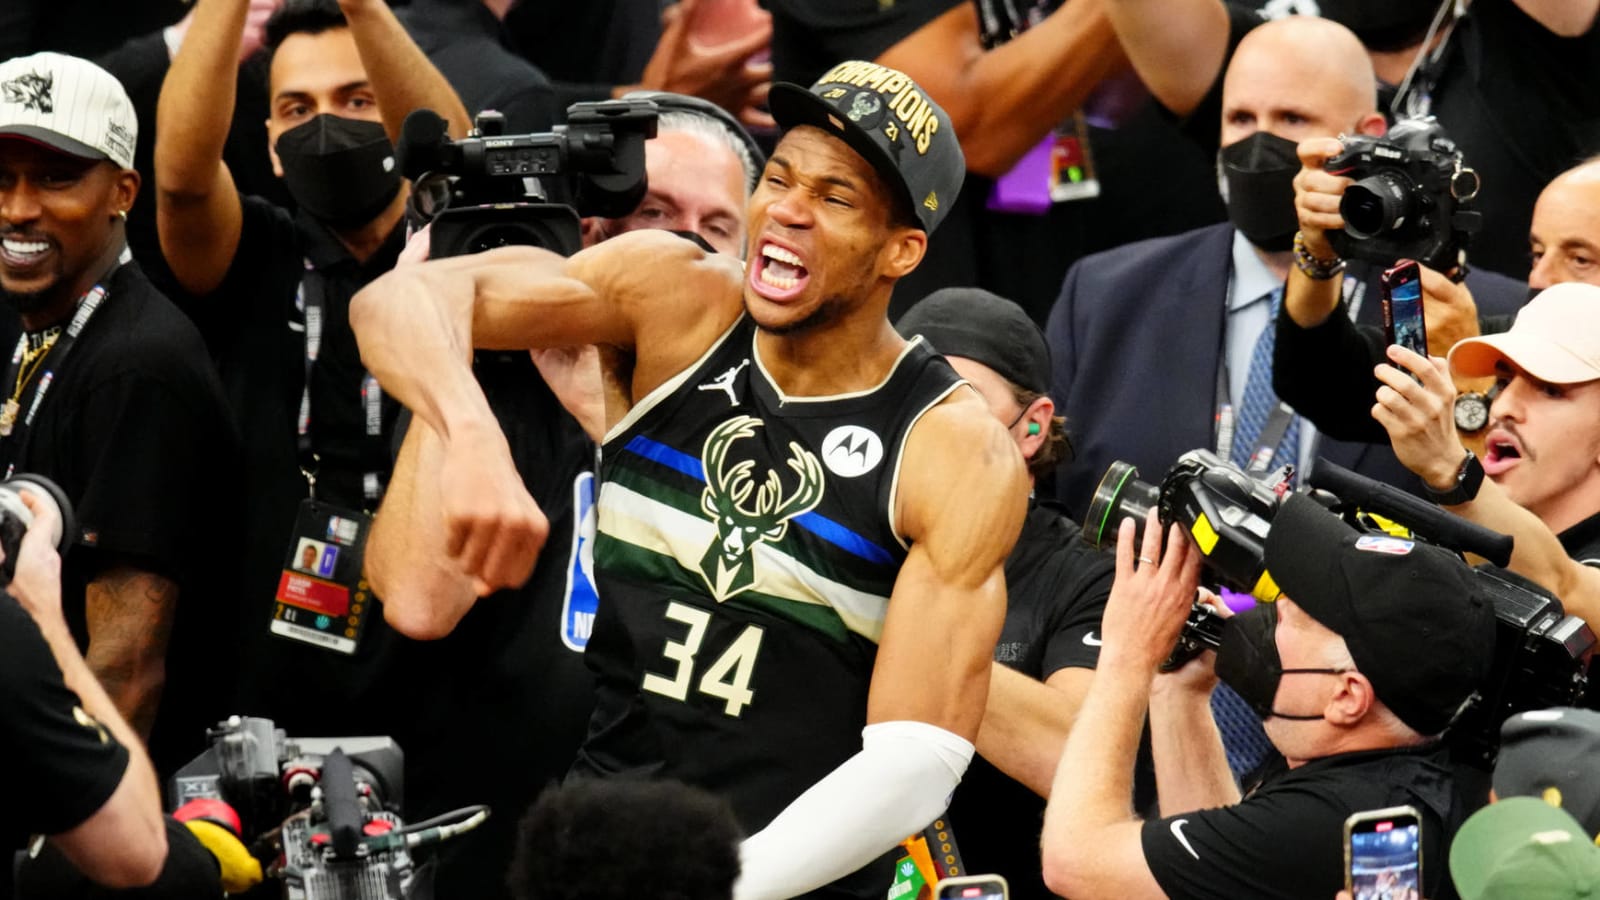 Watch: Giannis lets fan touch trophy at Chick-fil-A drive thru